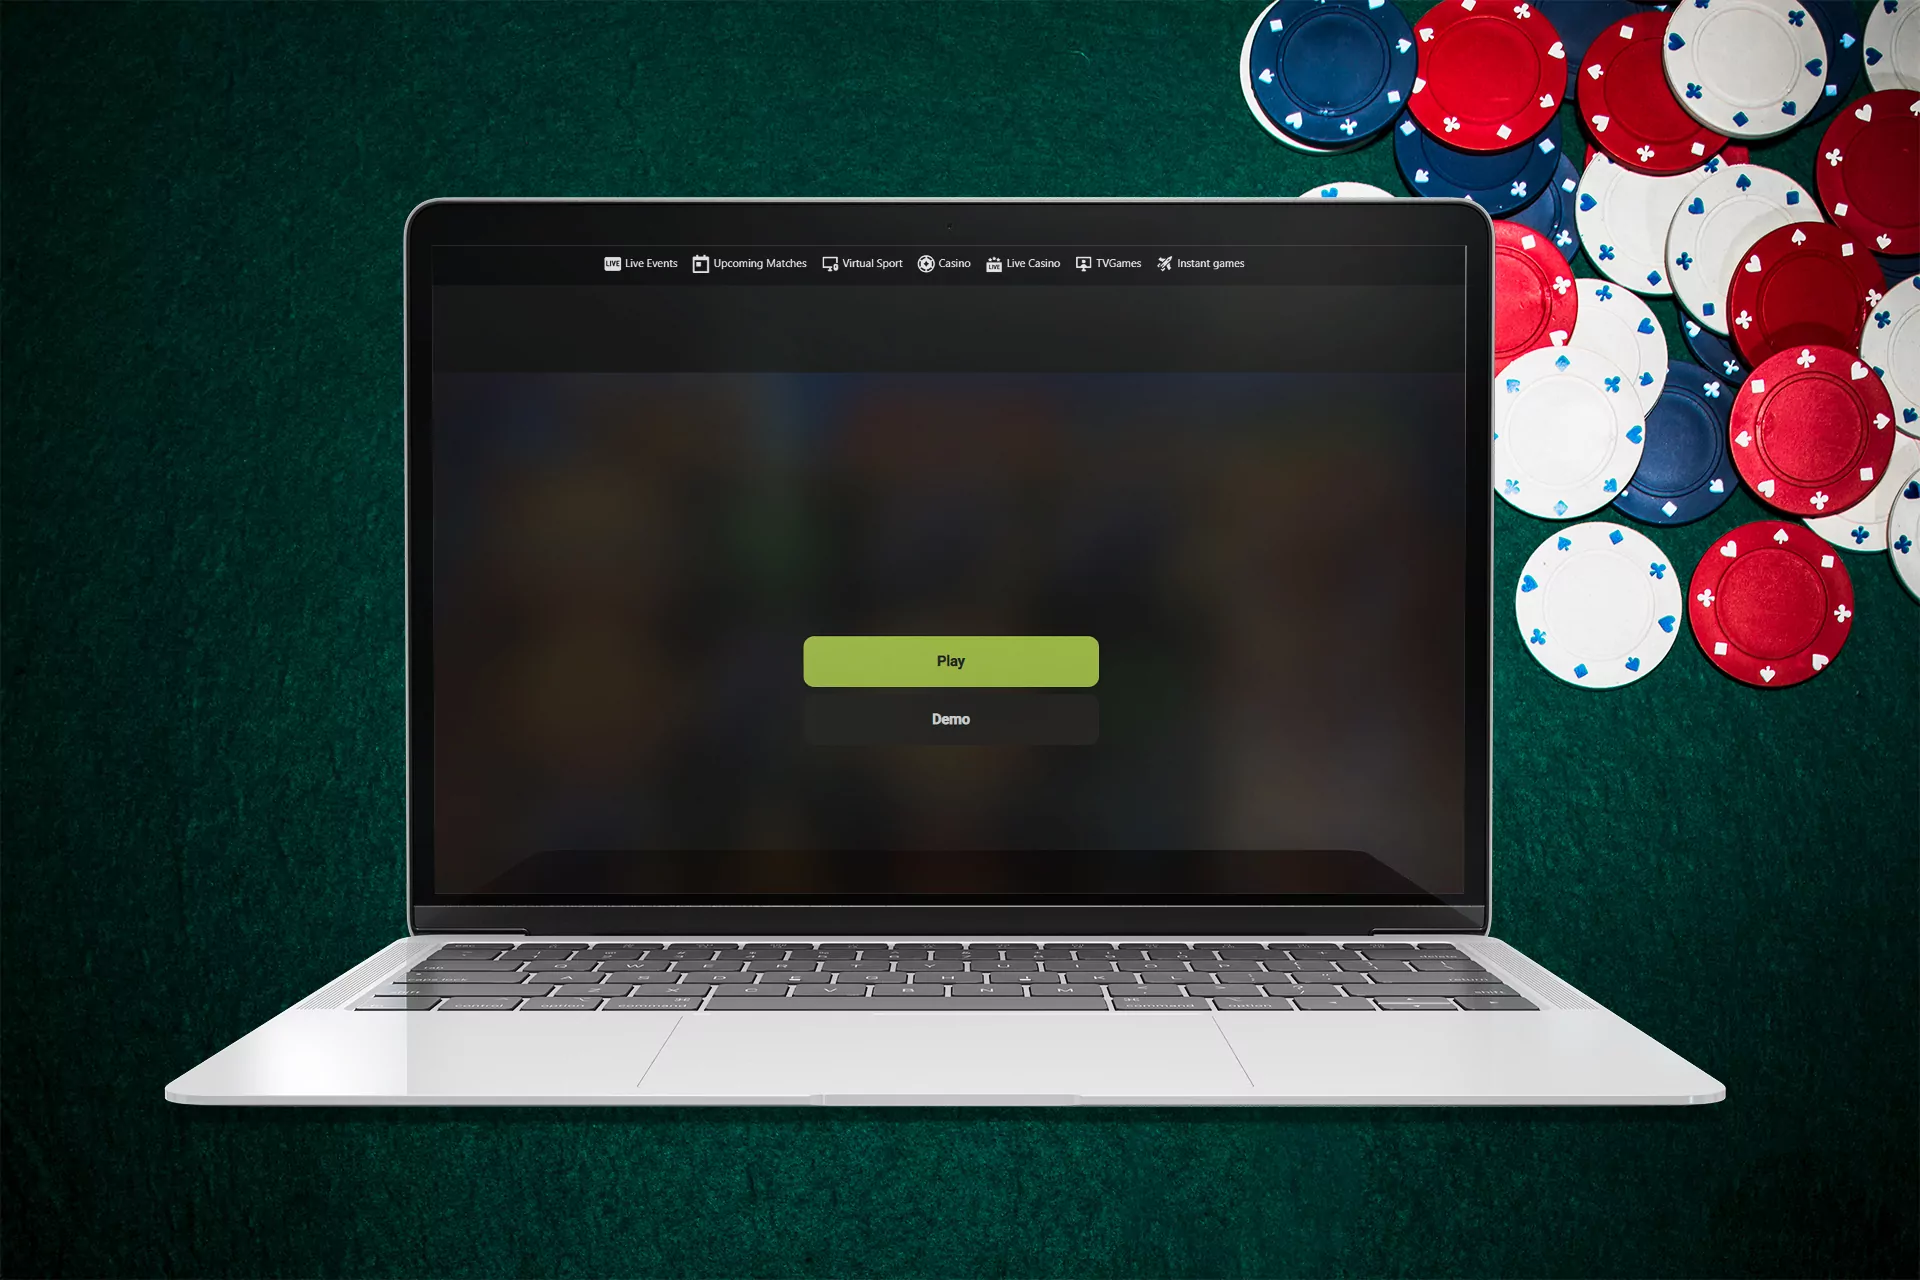 Start playing poker and win money in the online casino.